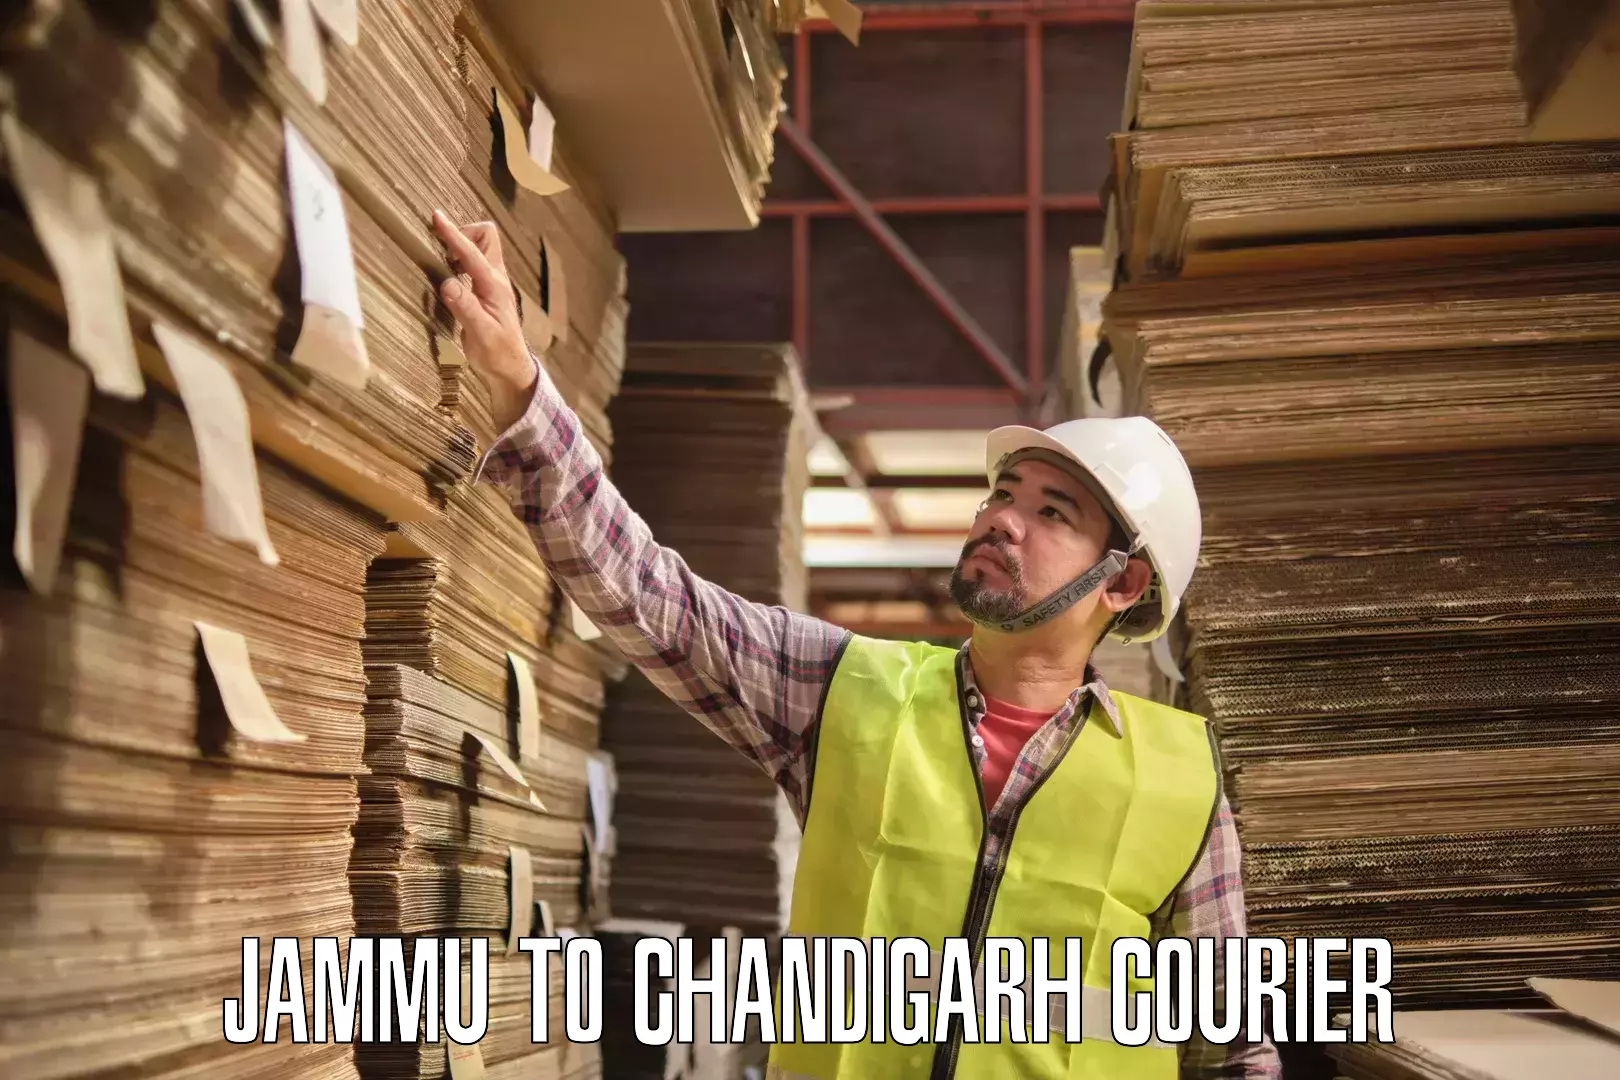 Reliable courier services Jammu to Chandigarh